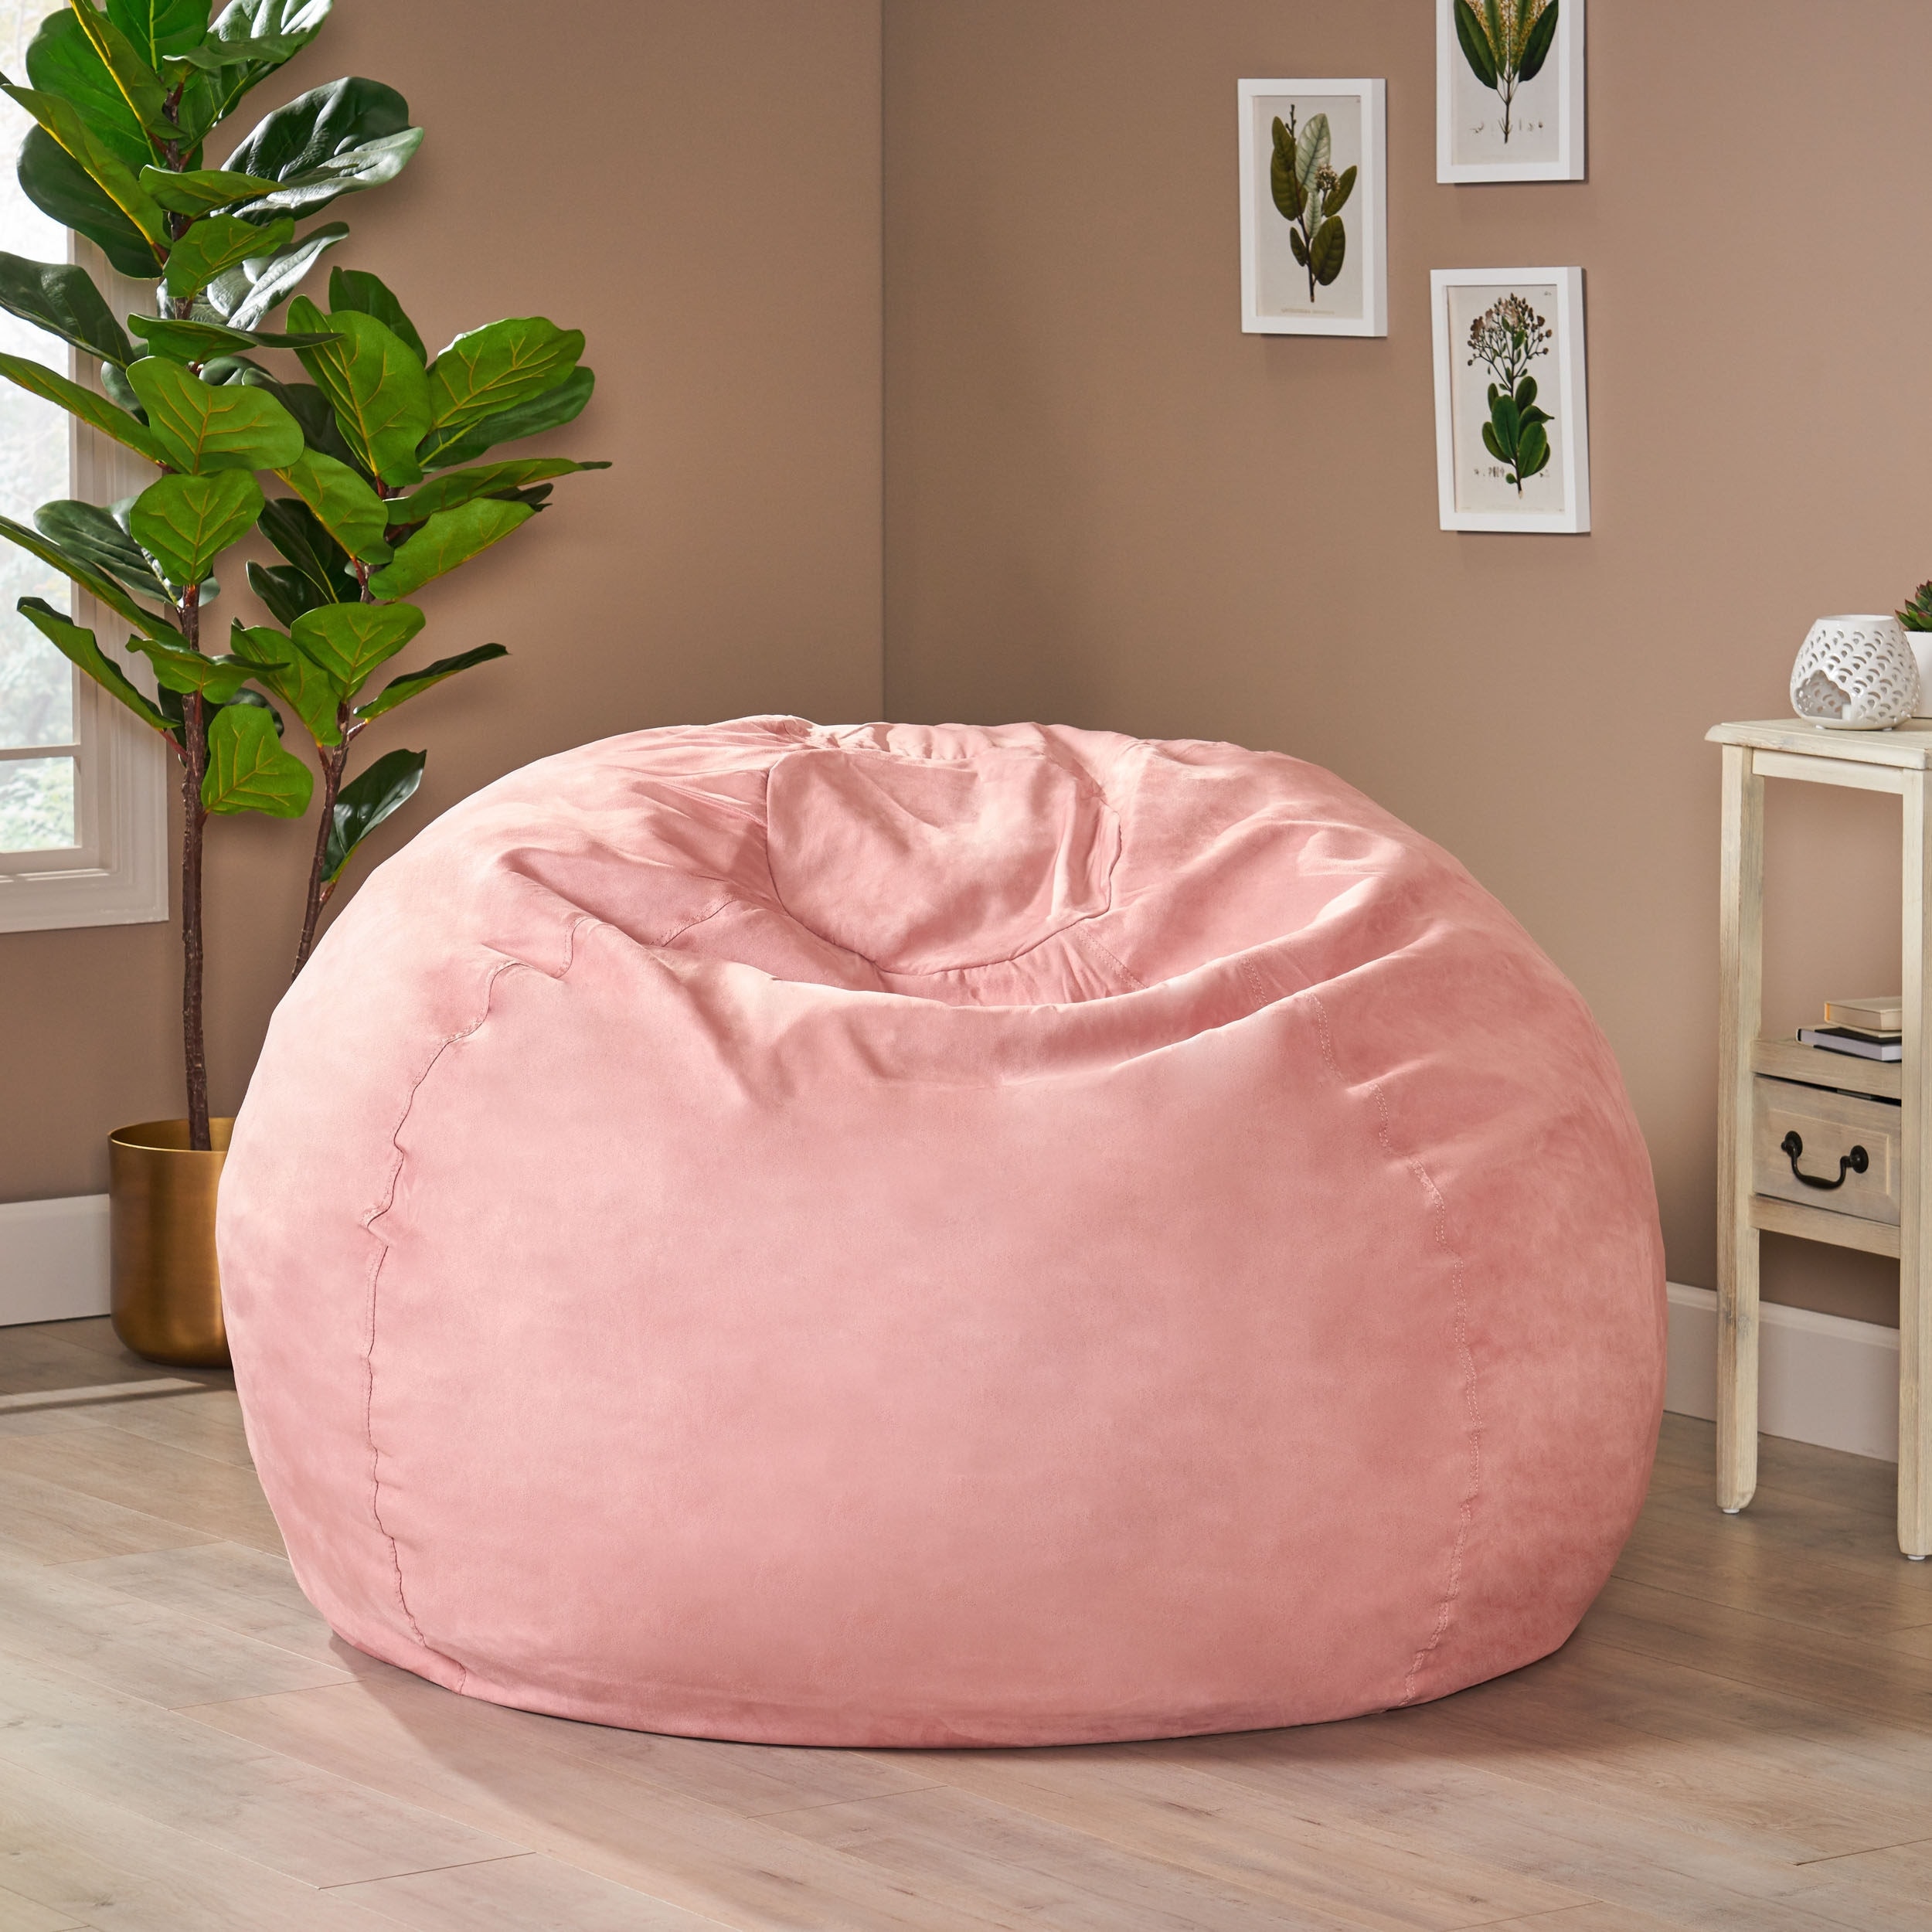 Buy Baby Pink Organic Premium Velvet Bean Bag Cover with Beans Online in  India at Best Price  Modern Bean Bags  Living Room Furniture  Furniture   Wooden Street Product